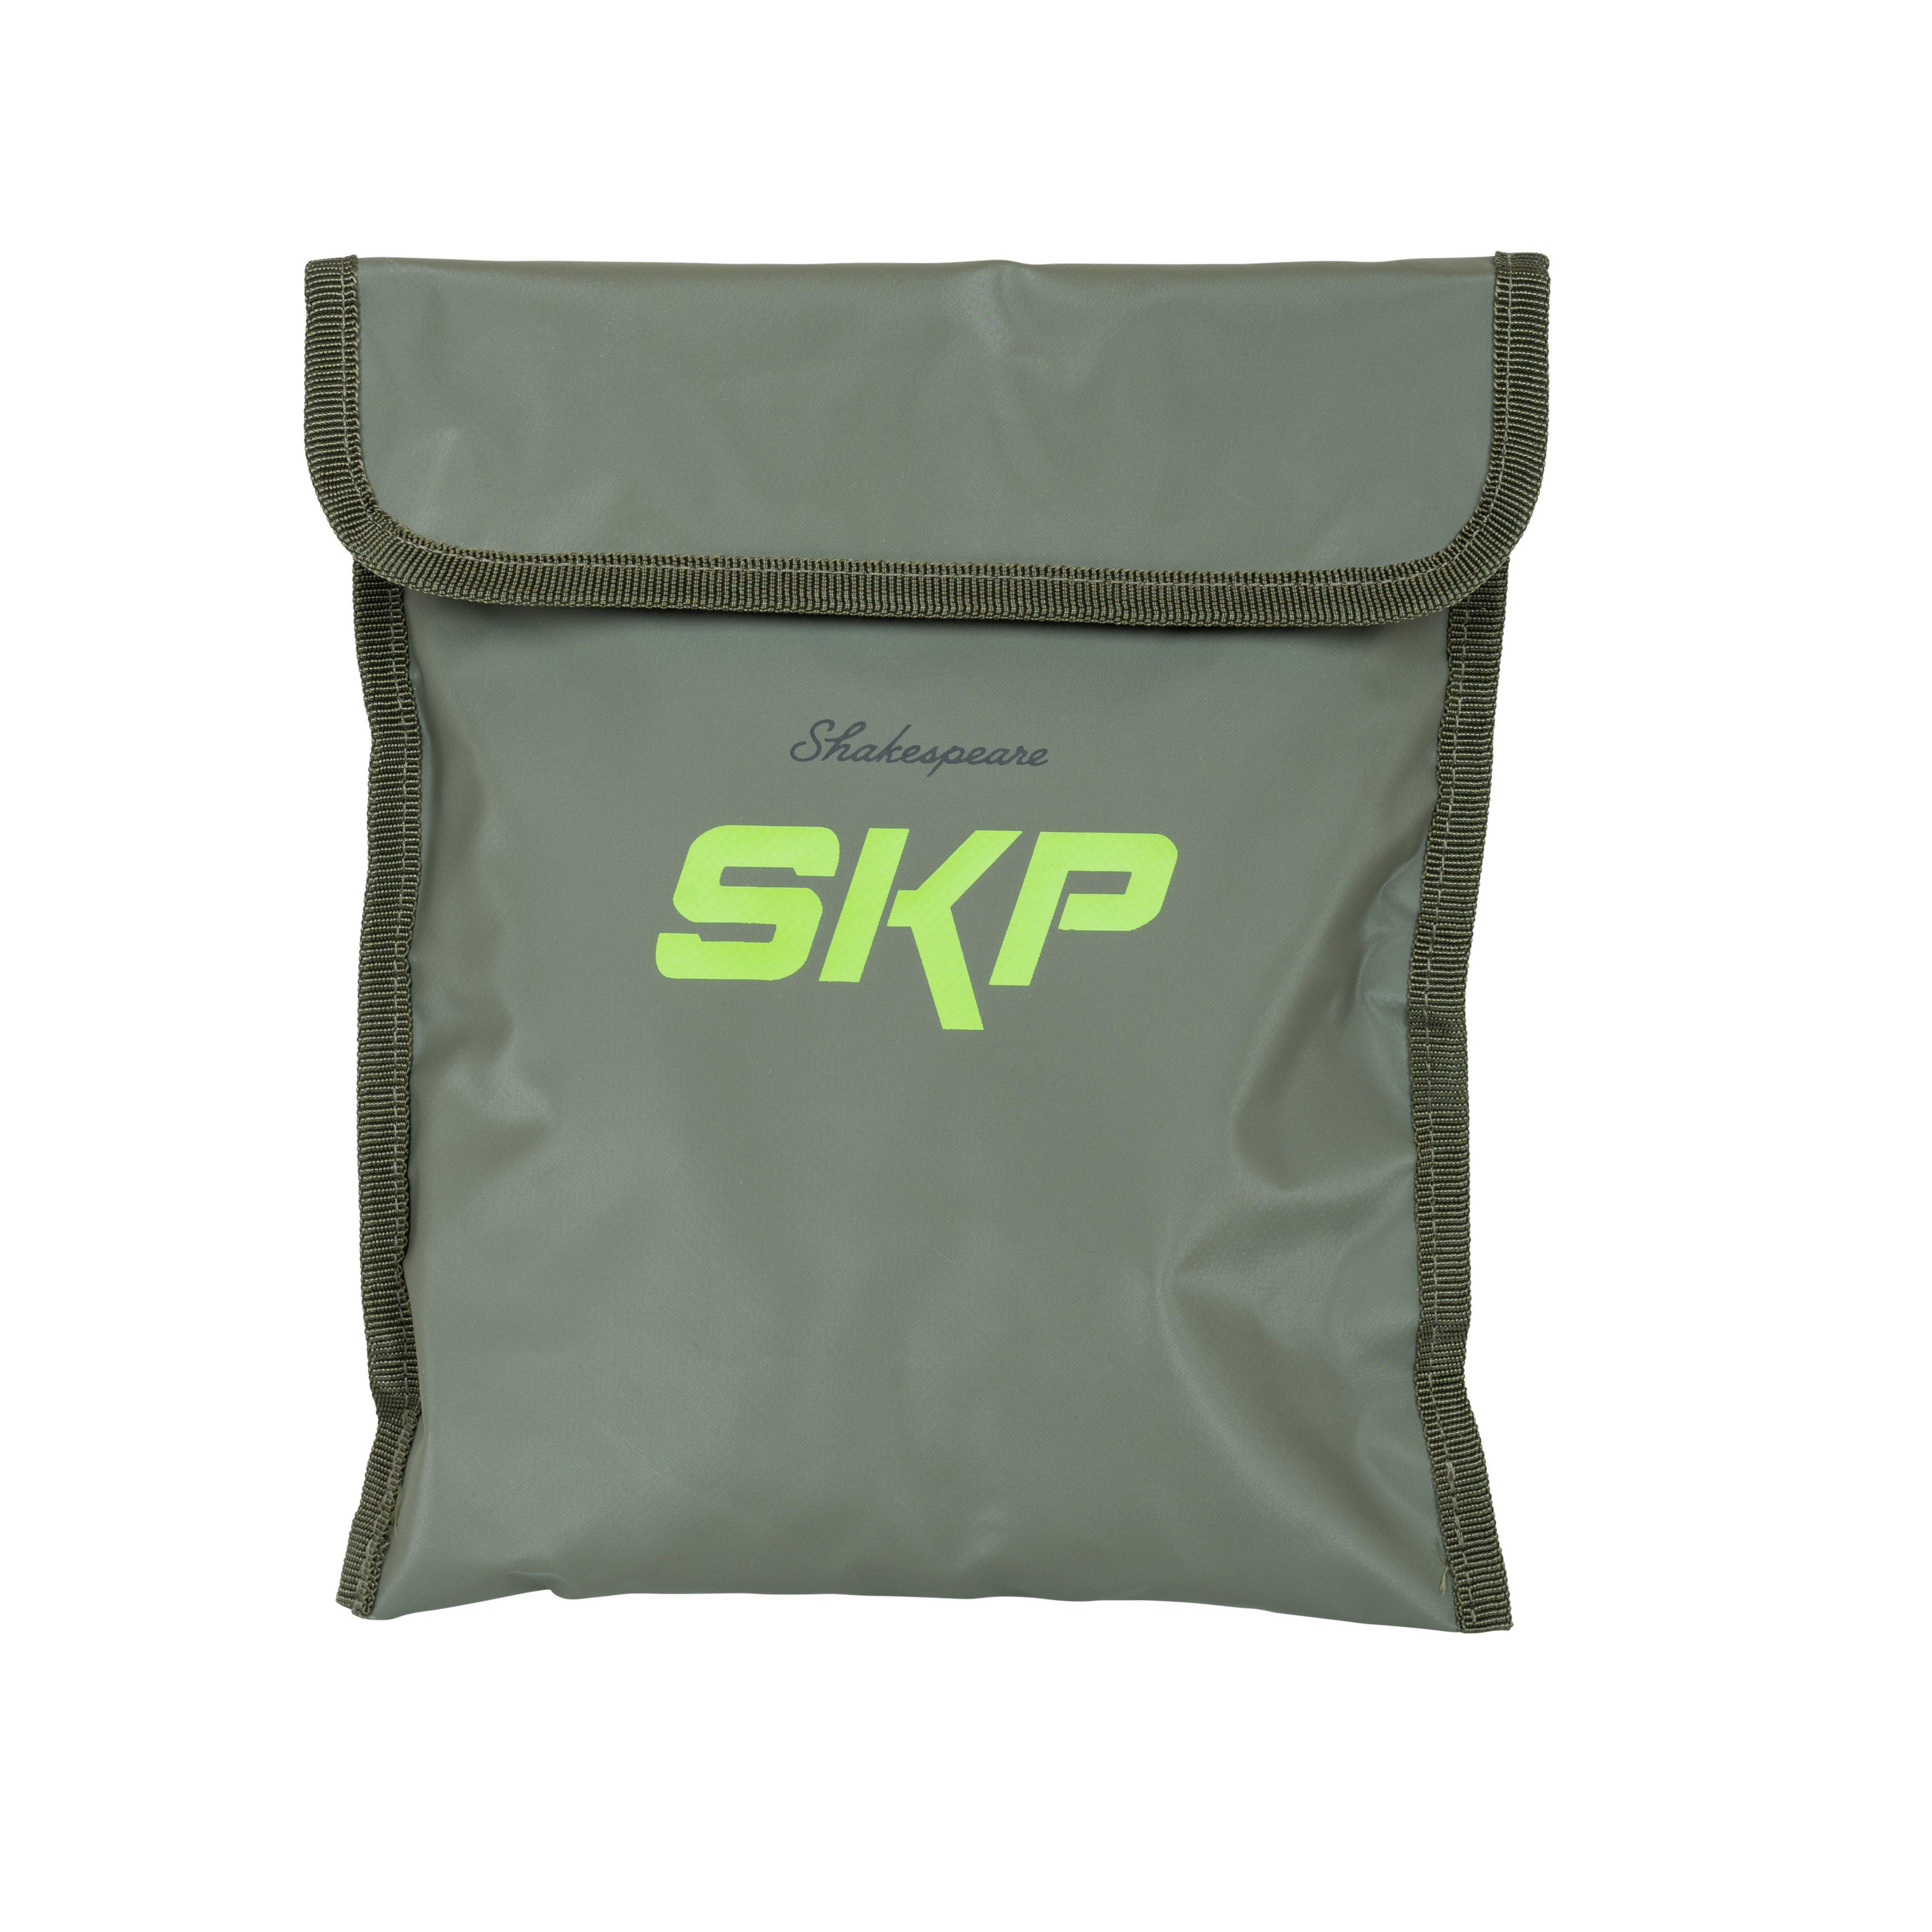 Shakespeare SKP Weigh and Retention Sling - Weigh & Retention Sling M